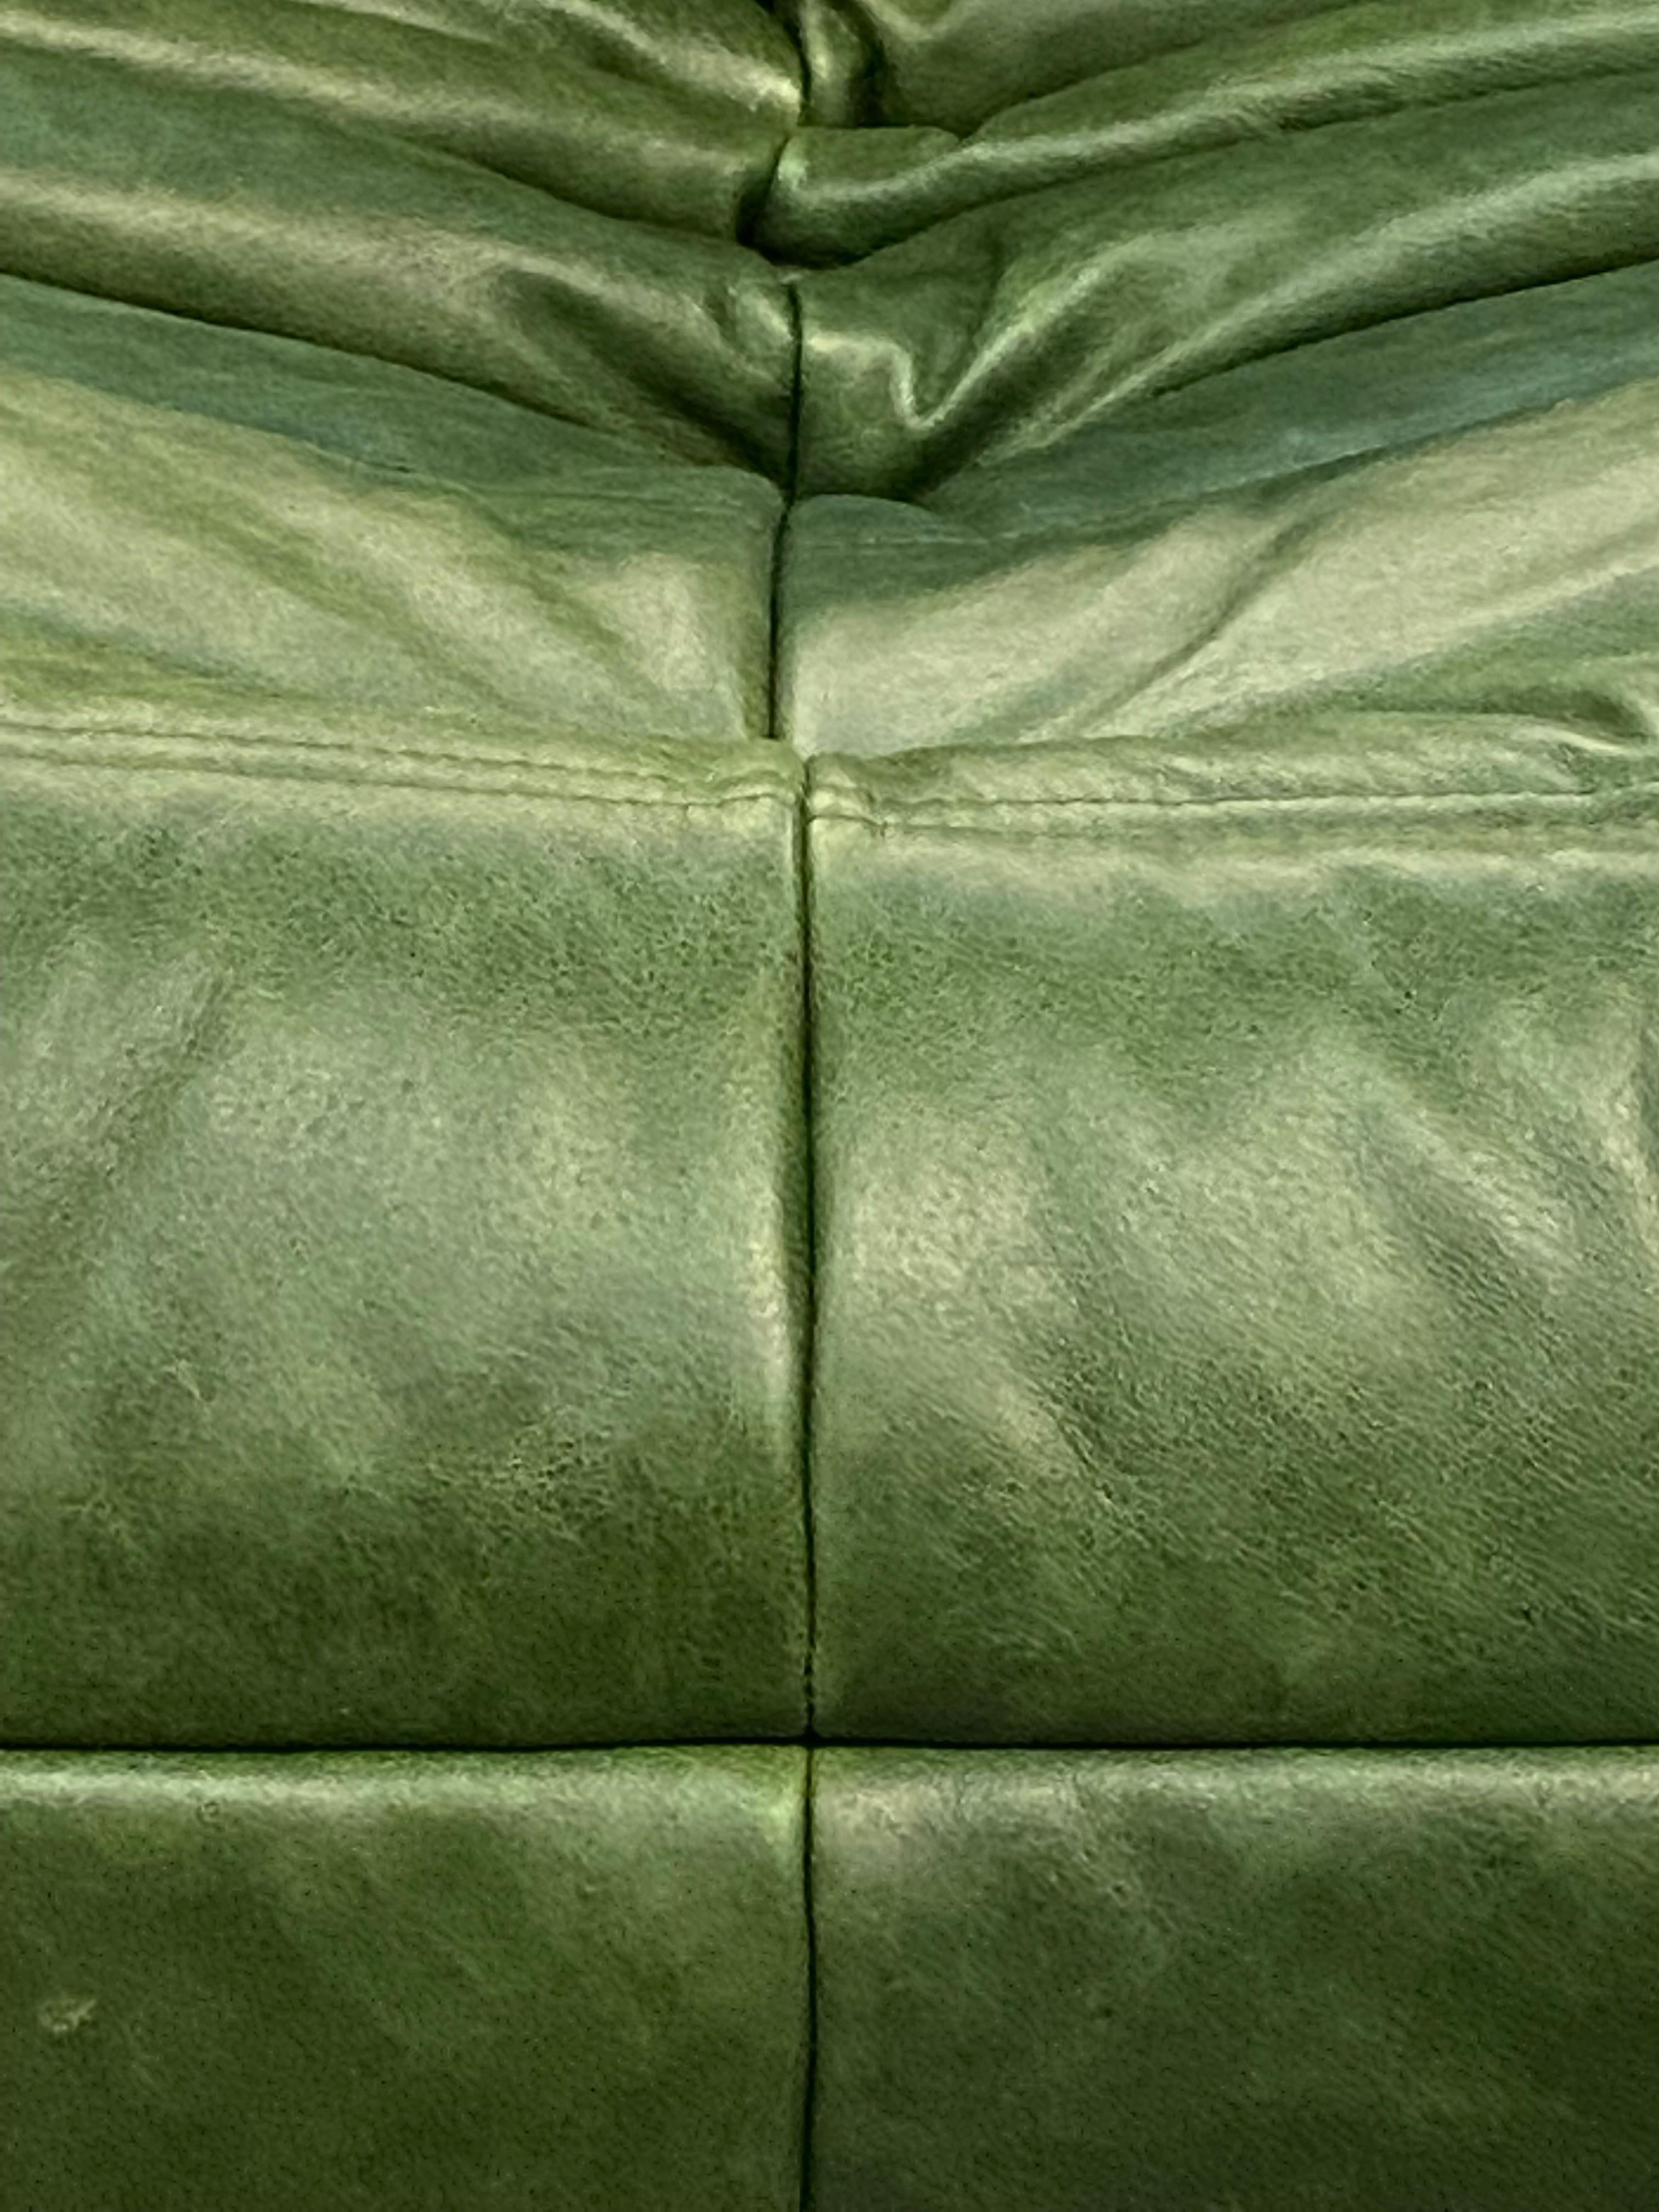 20th Century French  Togo Sofa in Green  Leather by Michel Ducaroy for Ligne Roset. For Sale